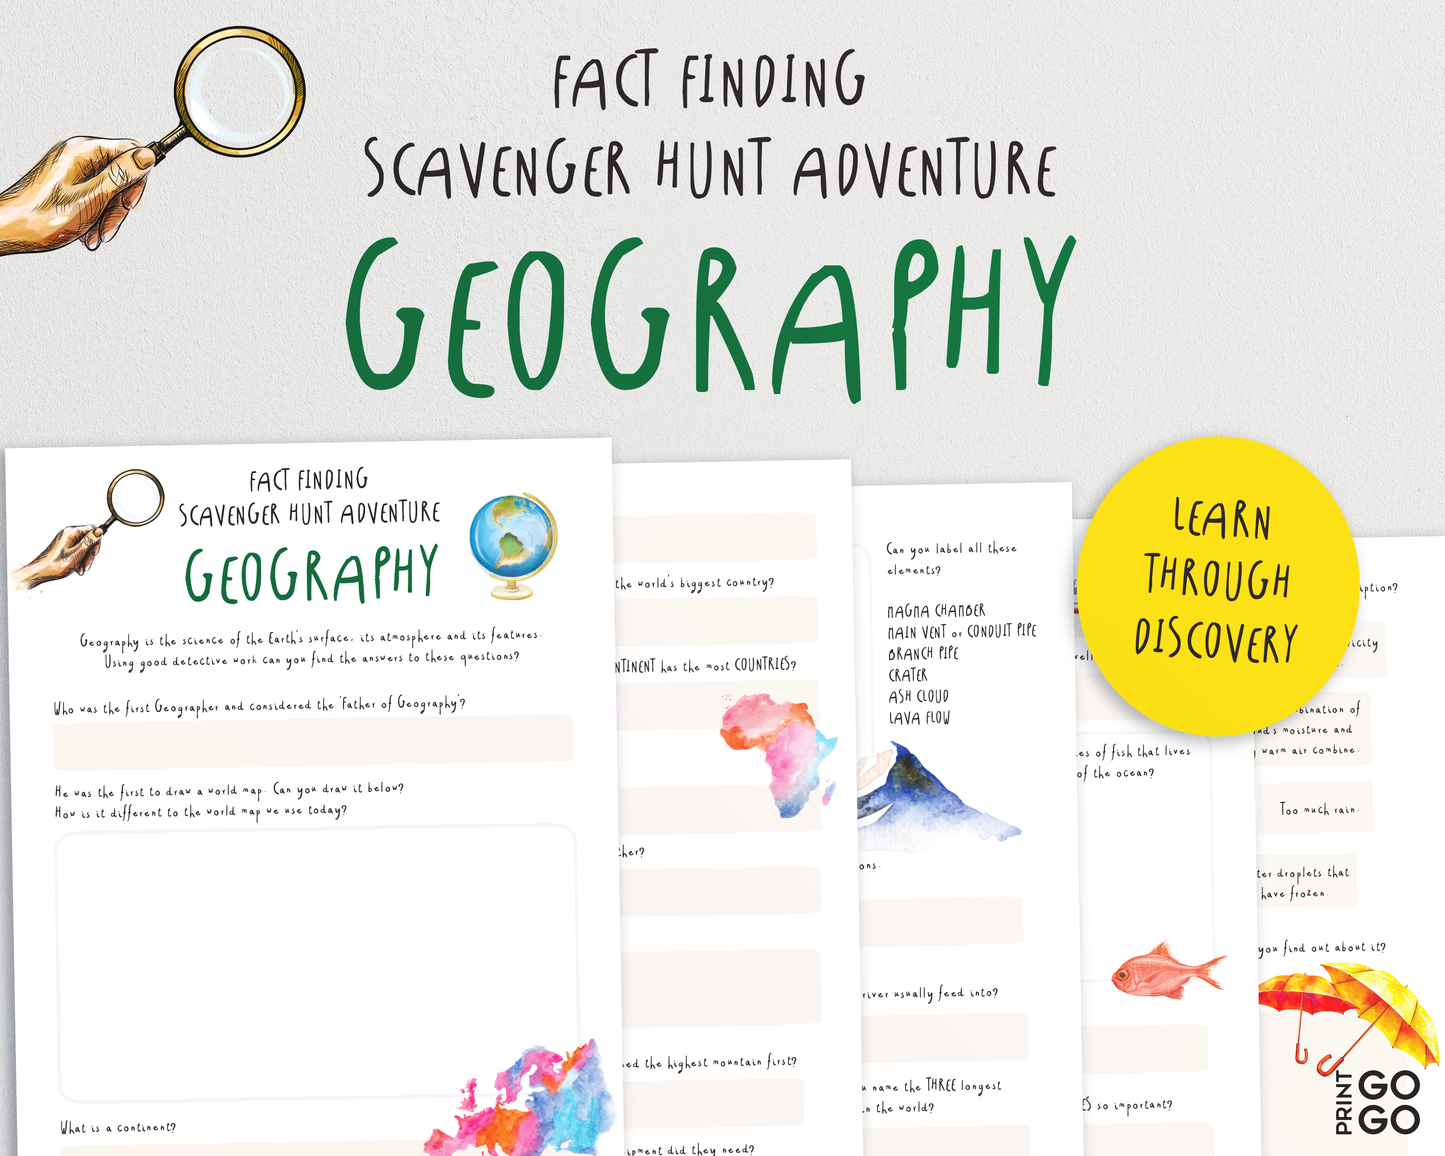 Geography - A Fact Finding Scavenger Hunt Adventure for Kids